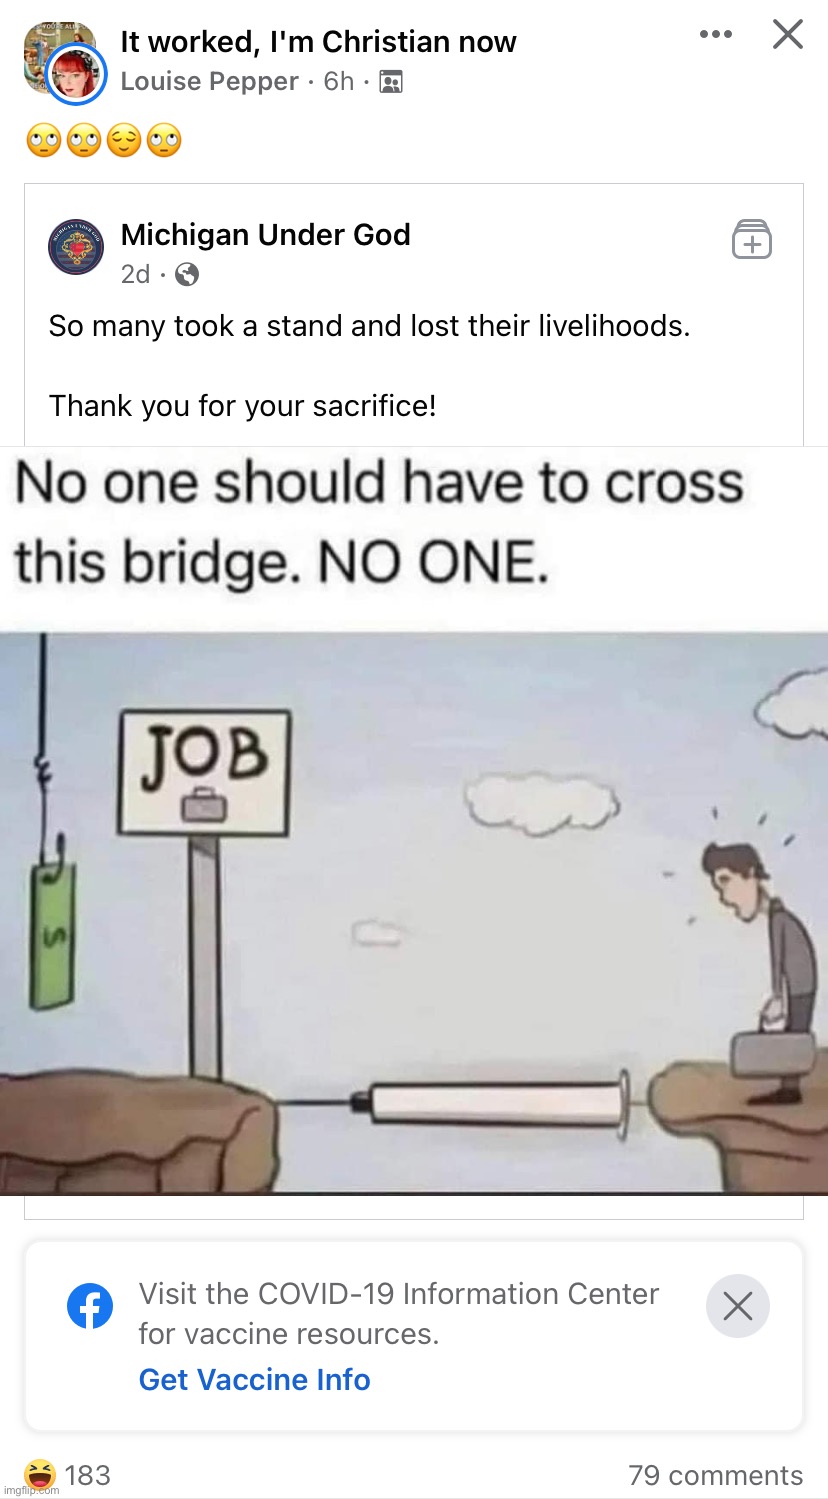 Should anyone have to cross this bridge? | image tagged in it worked i m christian now | made w/ Imgflip meme maker